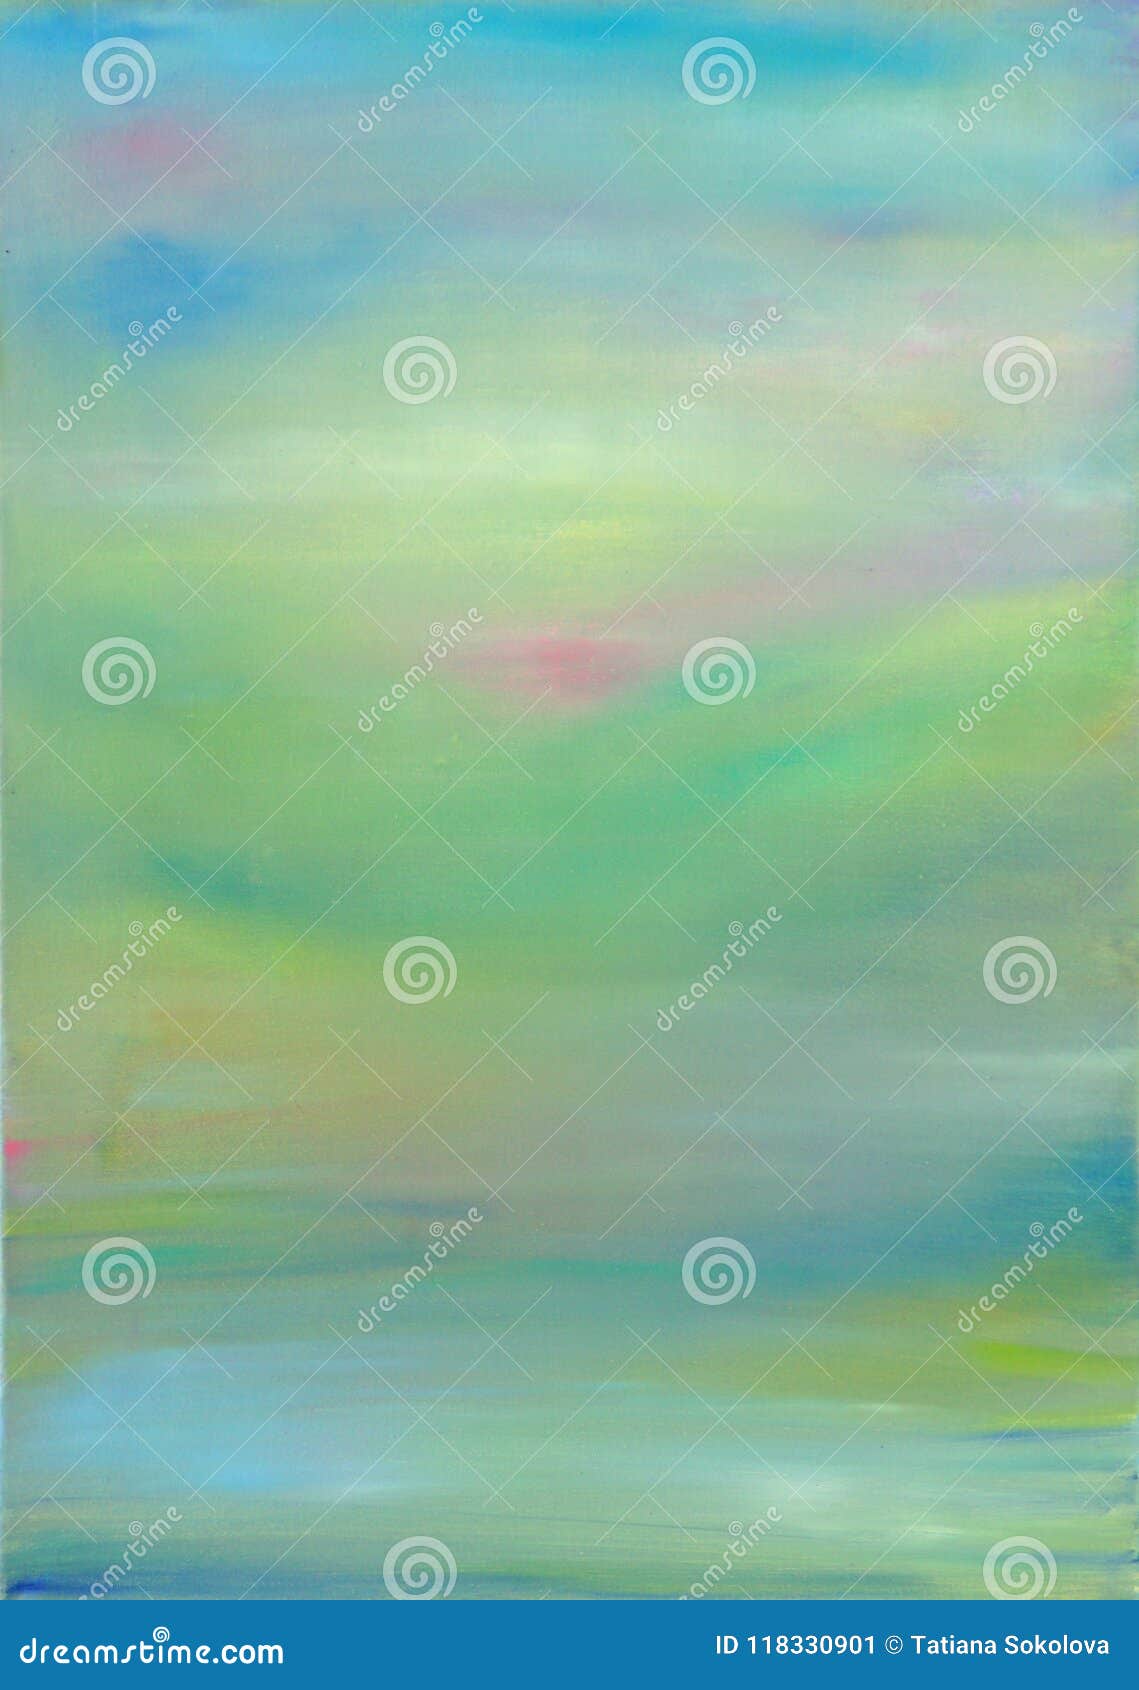 Soft Pastel Multicolored Background Stock Vector - Illustration of